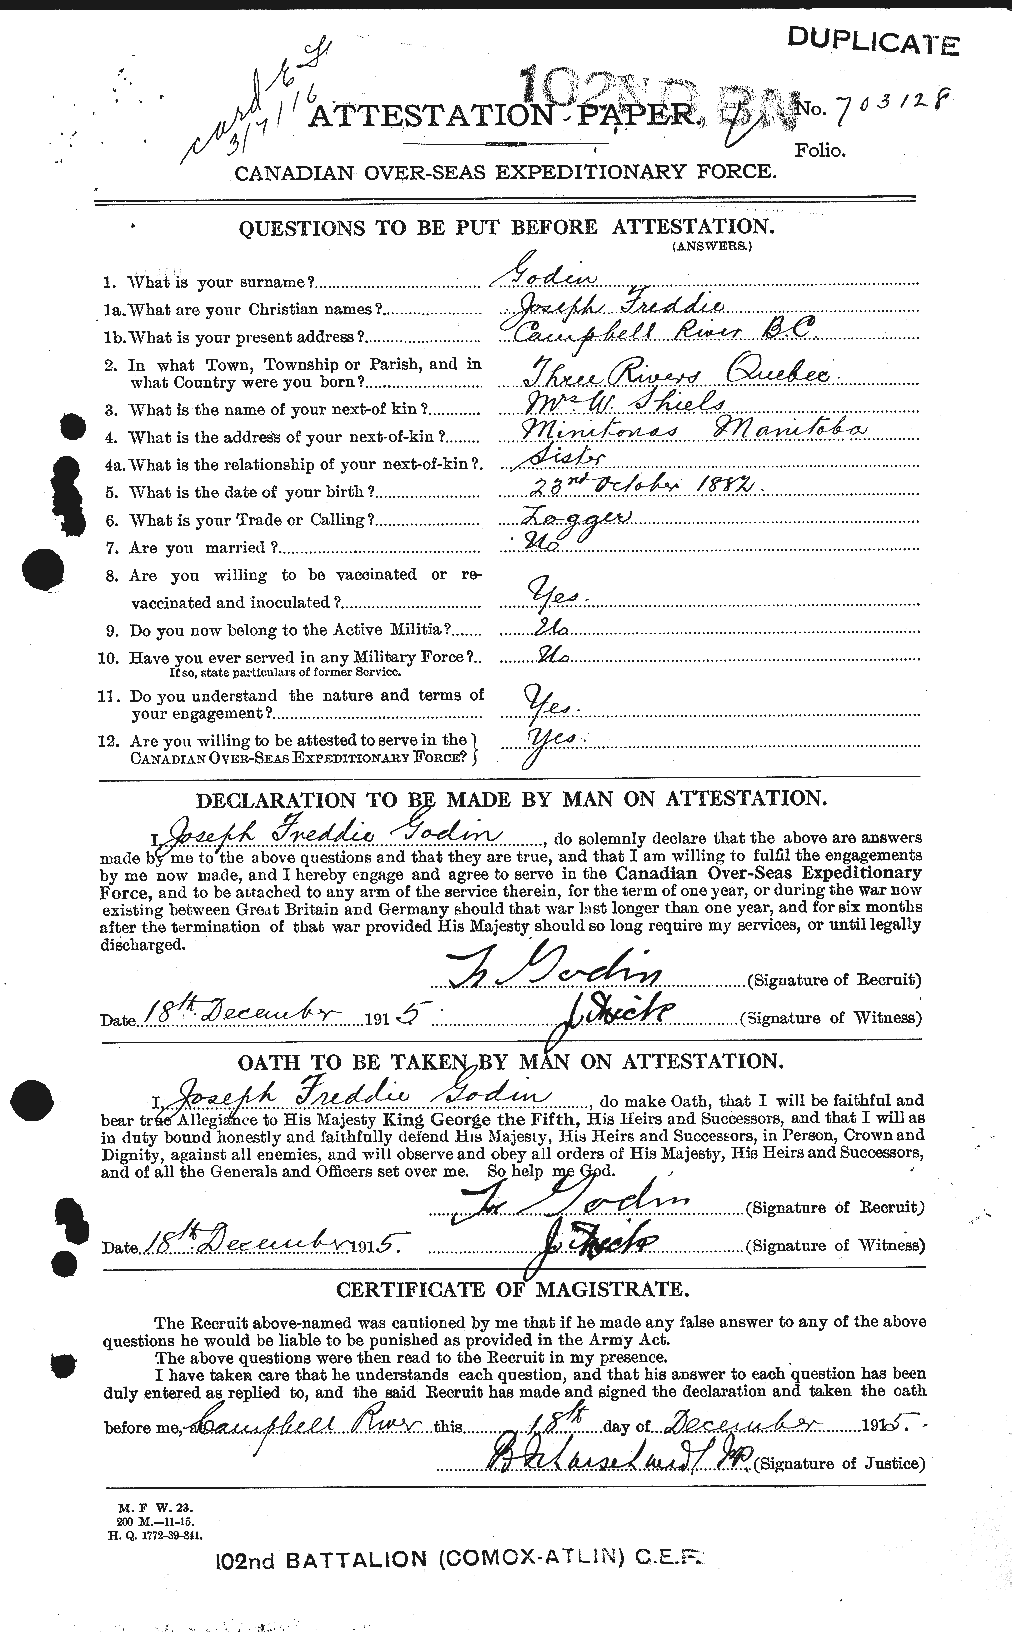 Personnel Records of the First World War - CEF 354540a